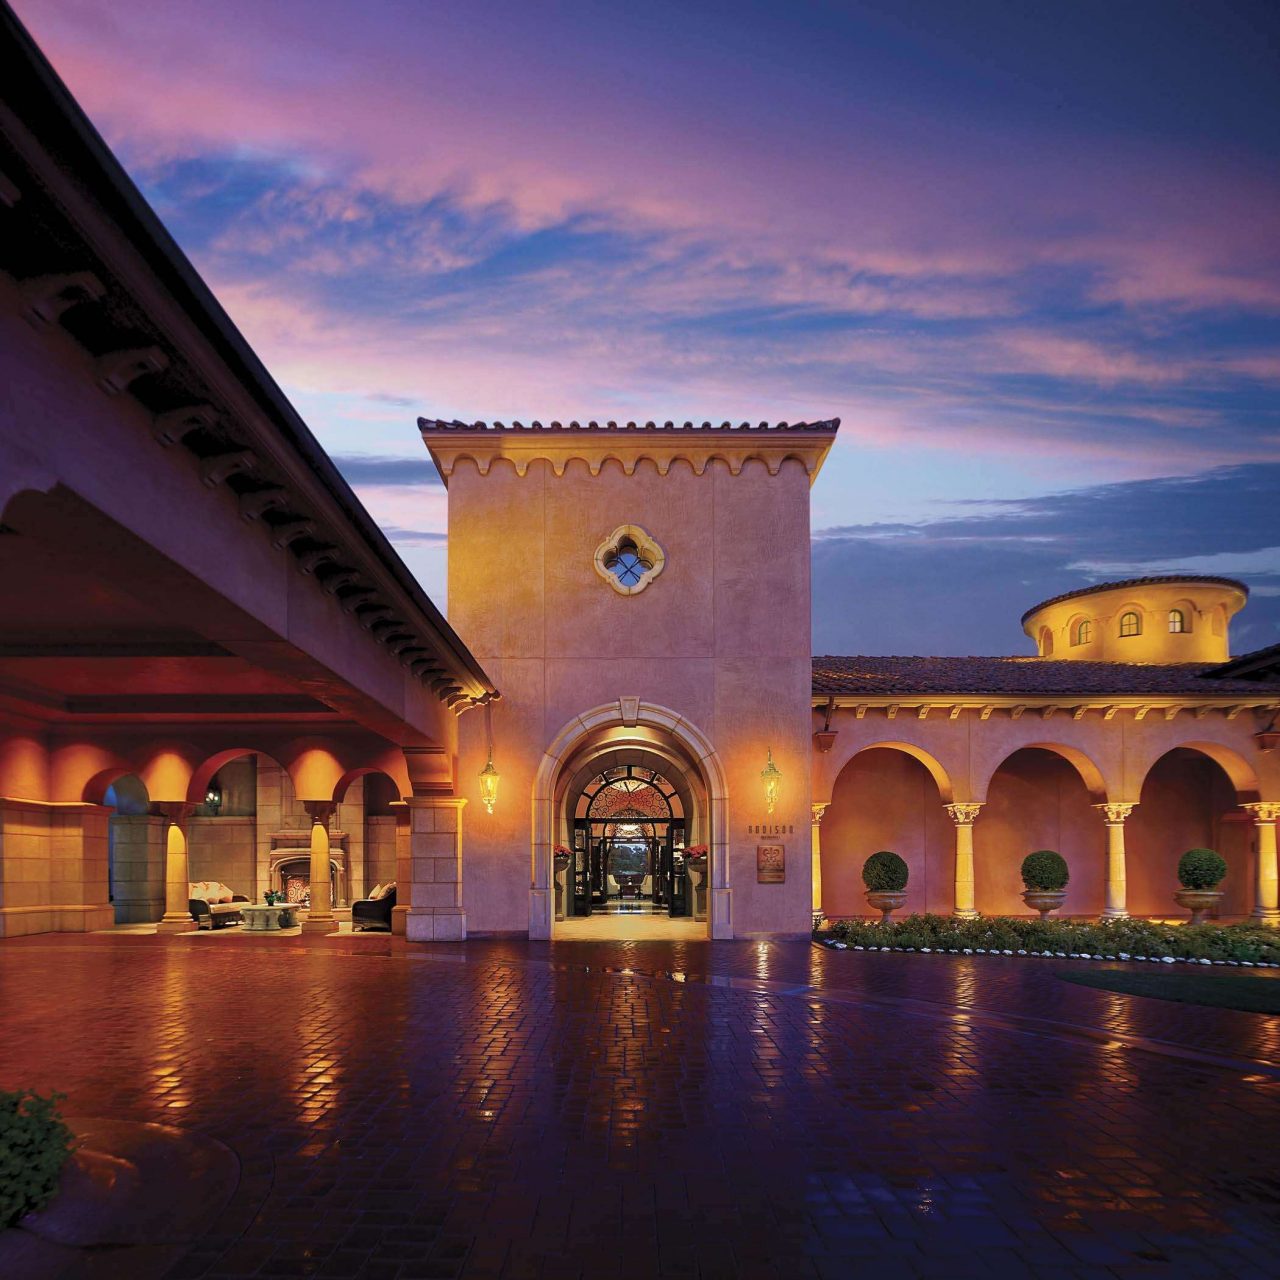 Night time exterior view of Fairmont Grand Del Mar